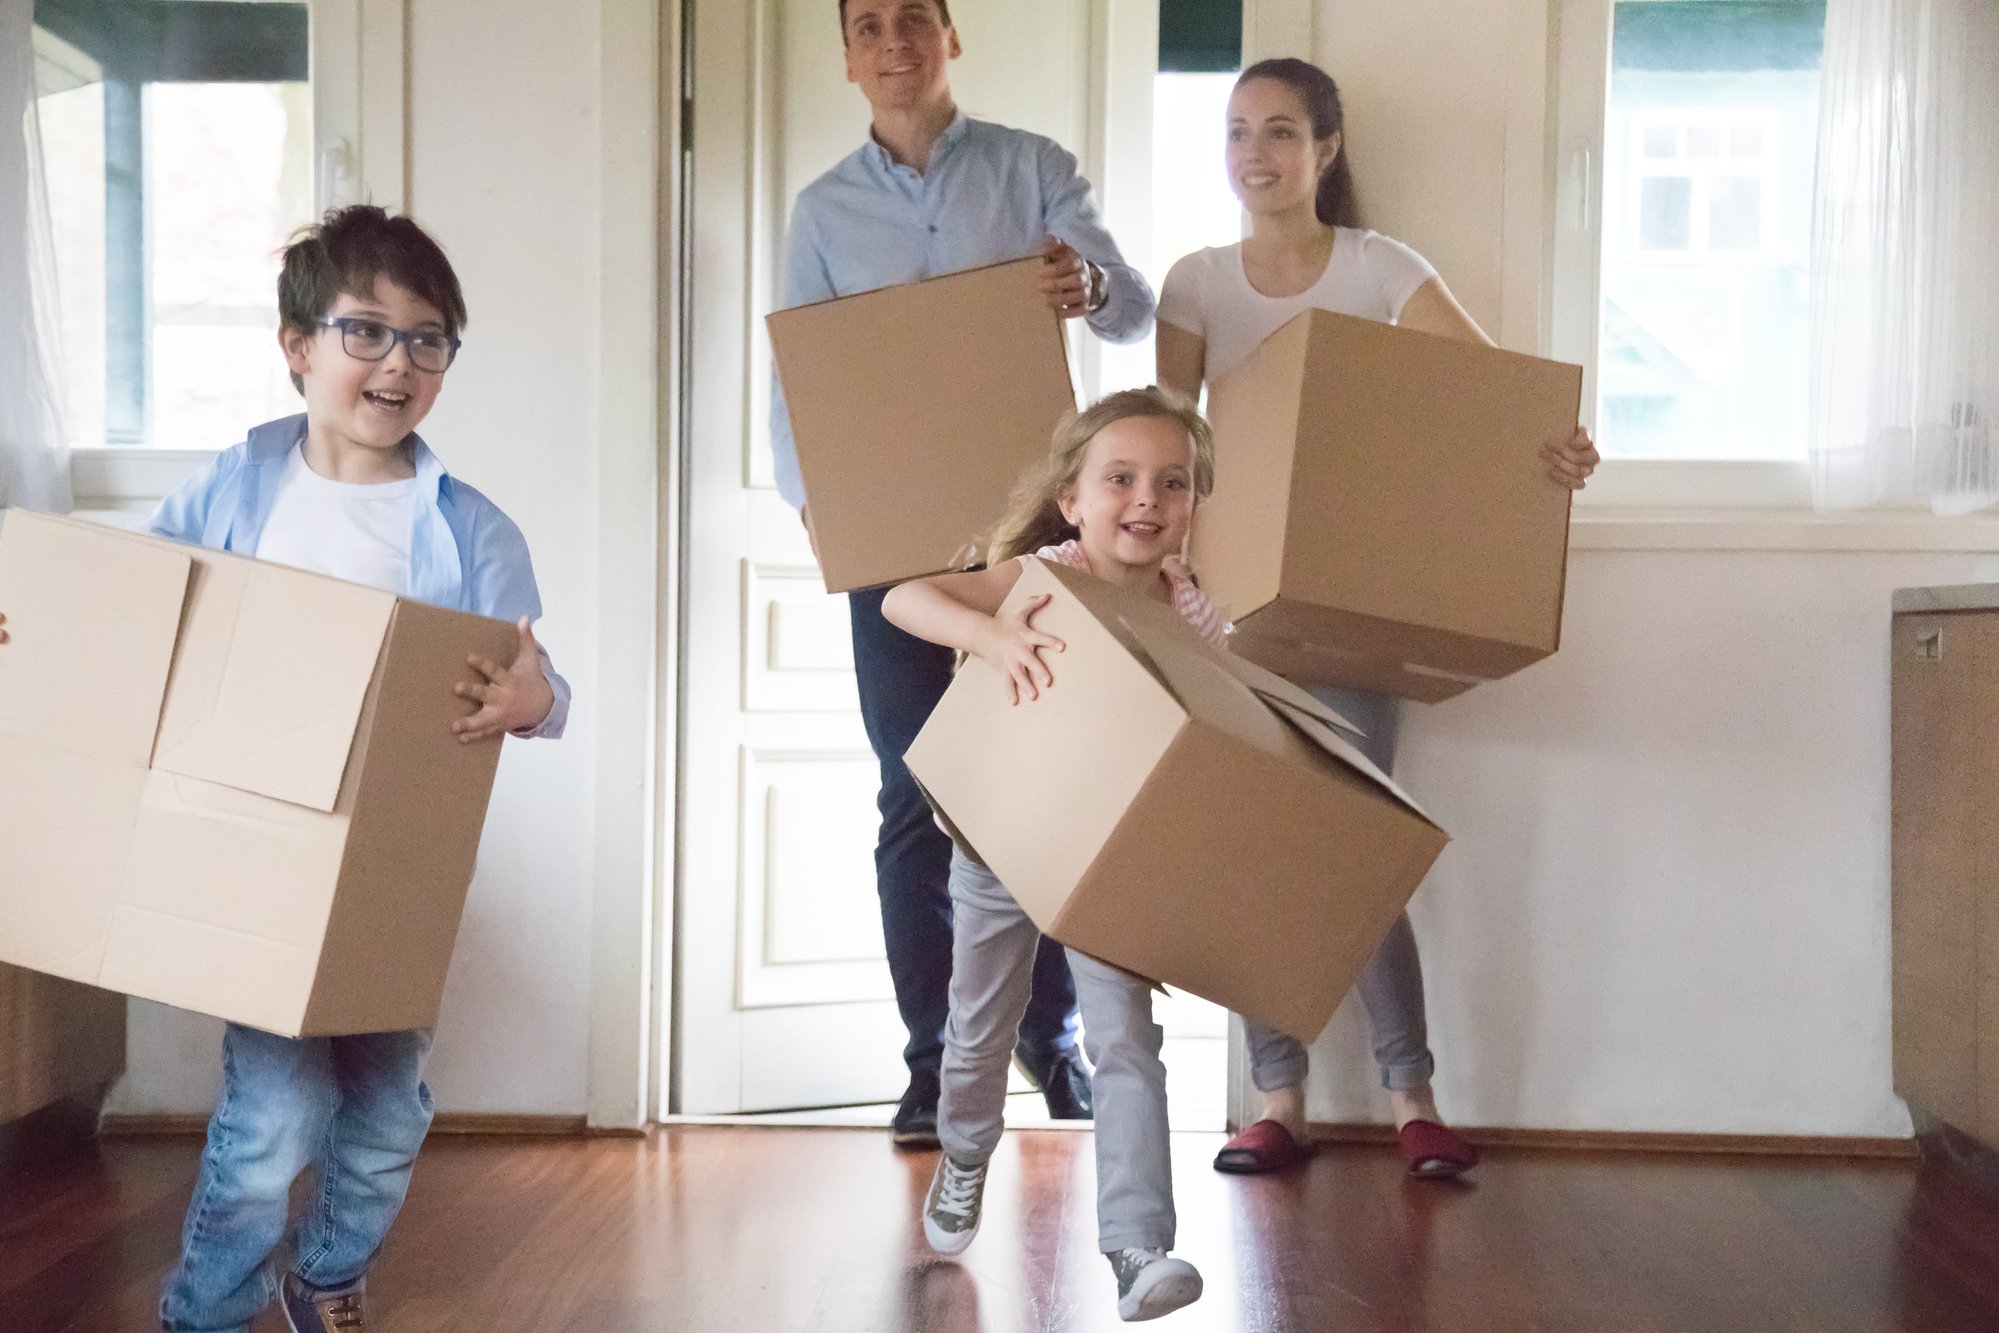 Excited kids running carrying boxes moving to new house